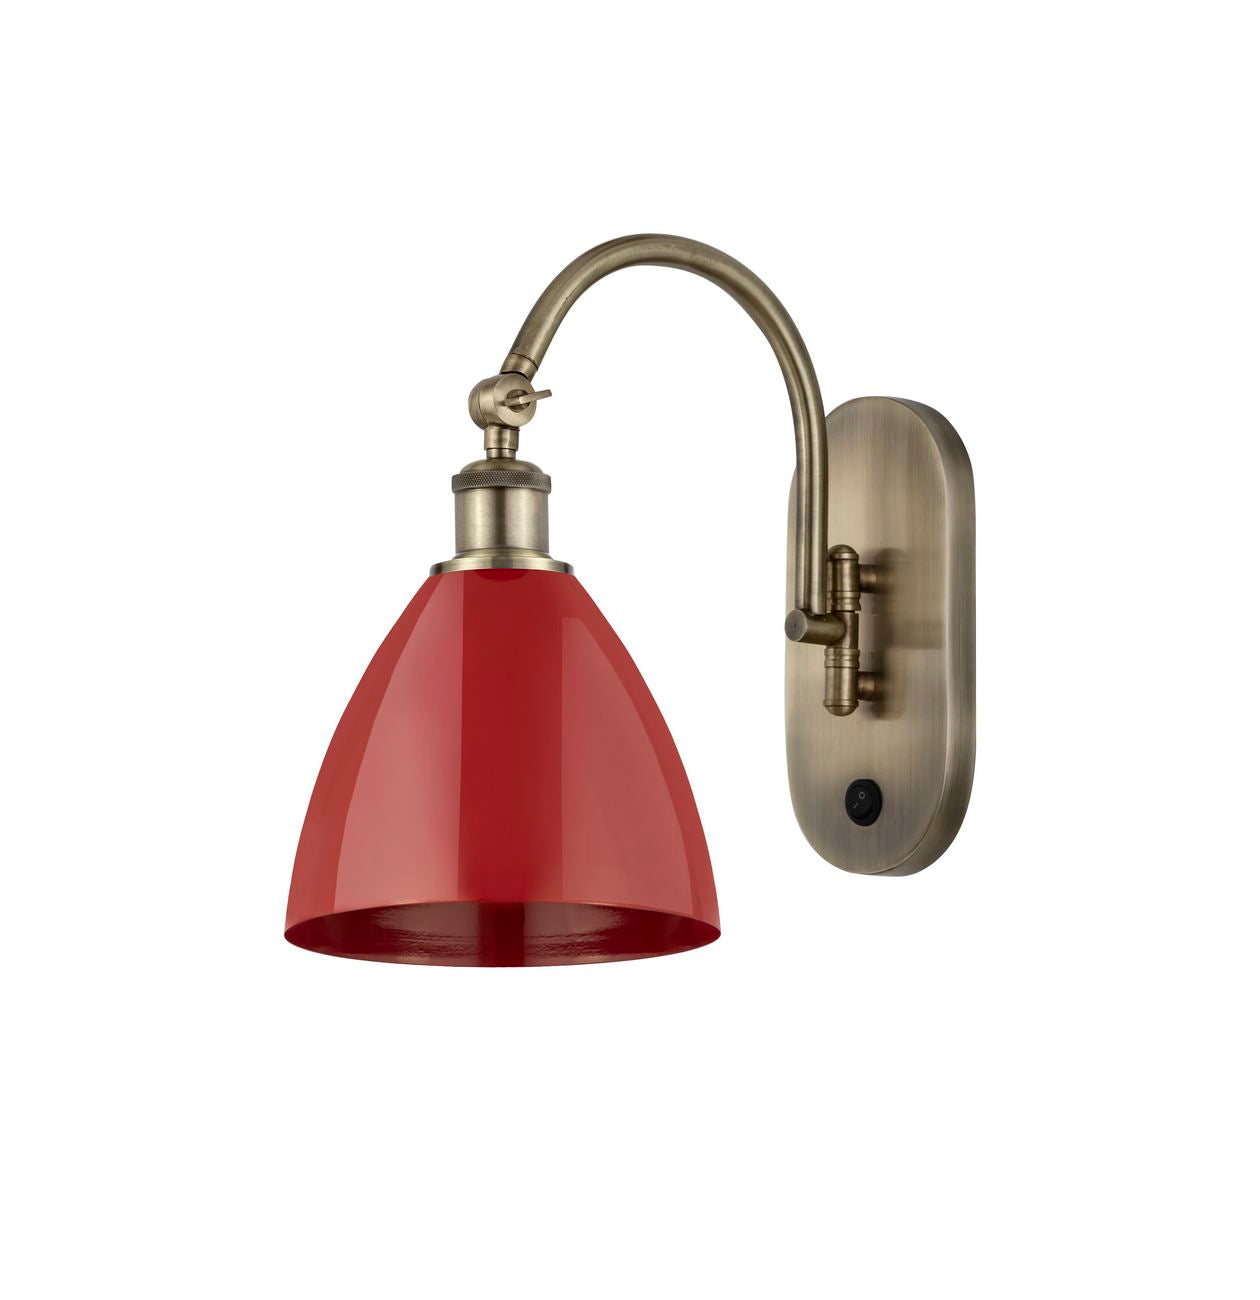 518-1W-AB-MBD-75-RD 1-Light 7.5" Antique Brass Sconce - Red Plymouth Dome Shade - LED Bulb - Dimmensions: 7.5 x 13.75 x 13.25 - Glass Up or Down: Yes